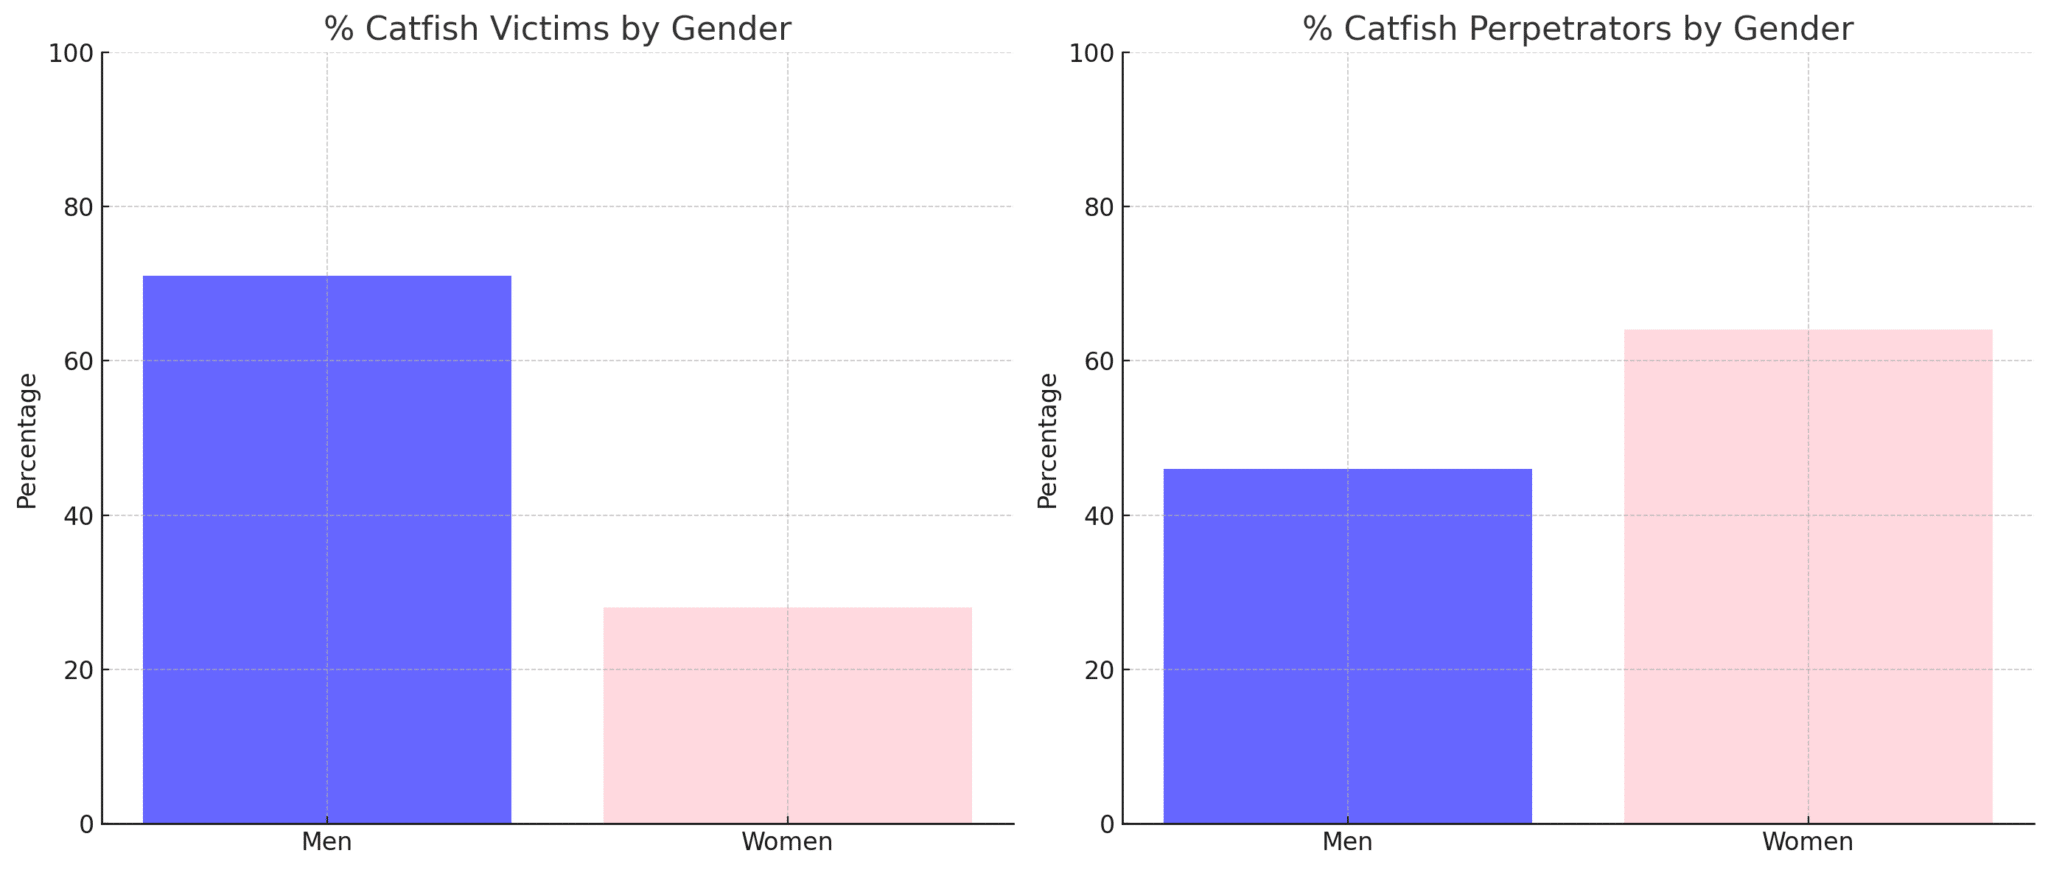 Distribution of Catfish Victims and Perpetrators by Gender